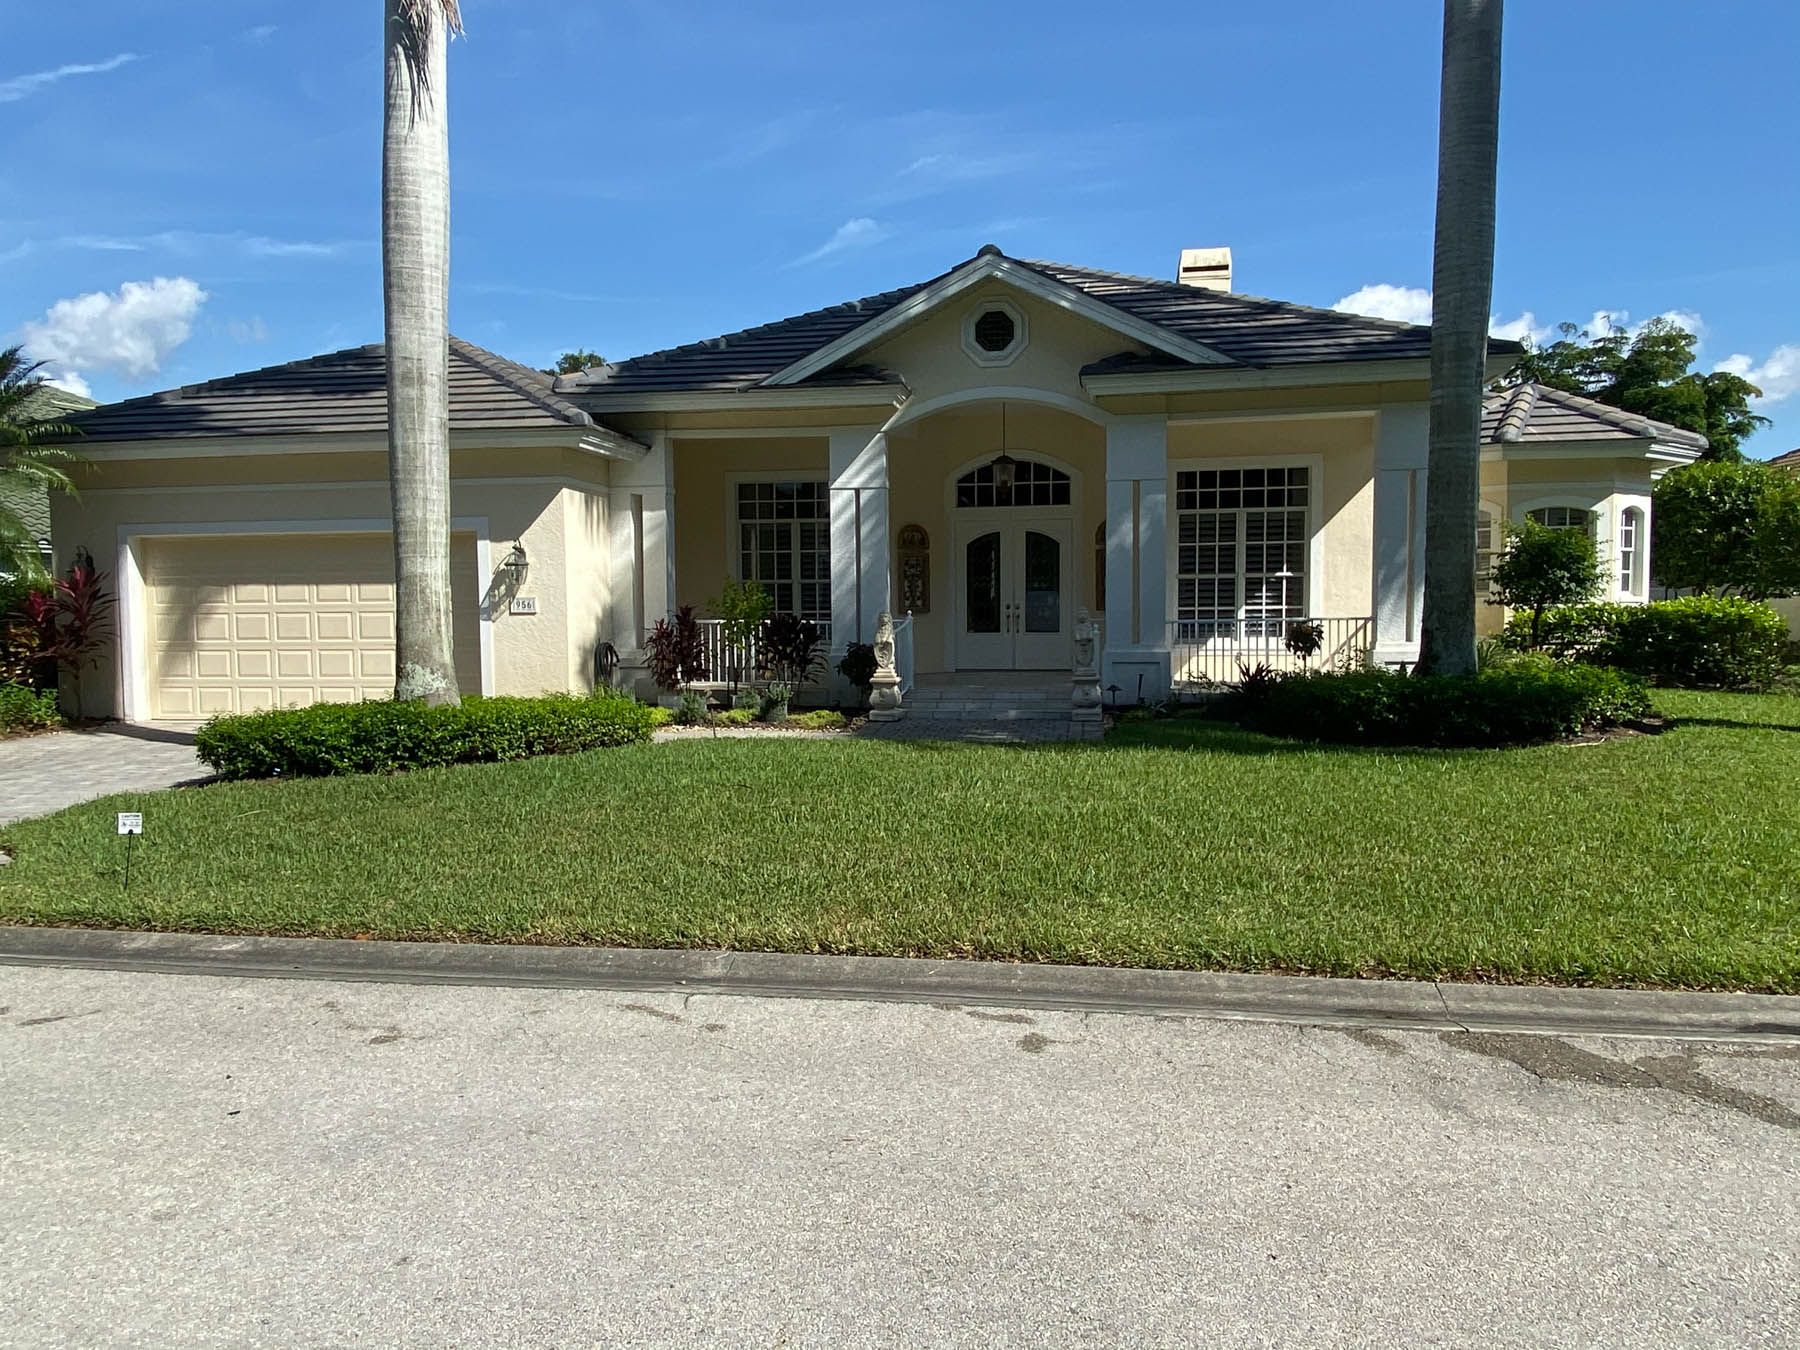 Exterior residential painting on home in Naples FL